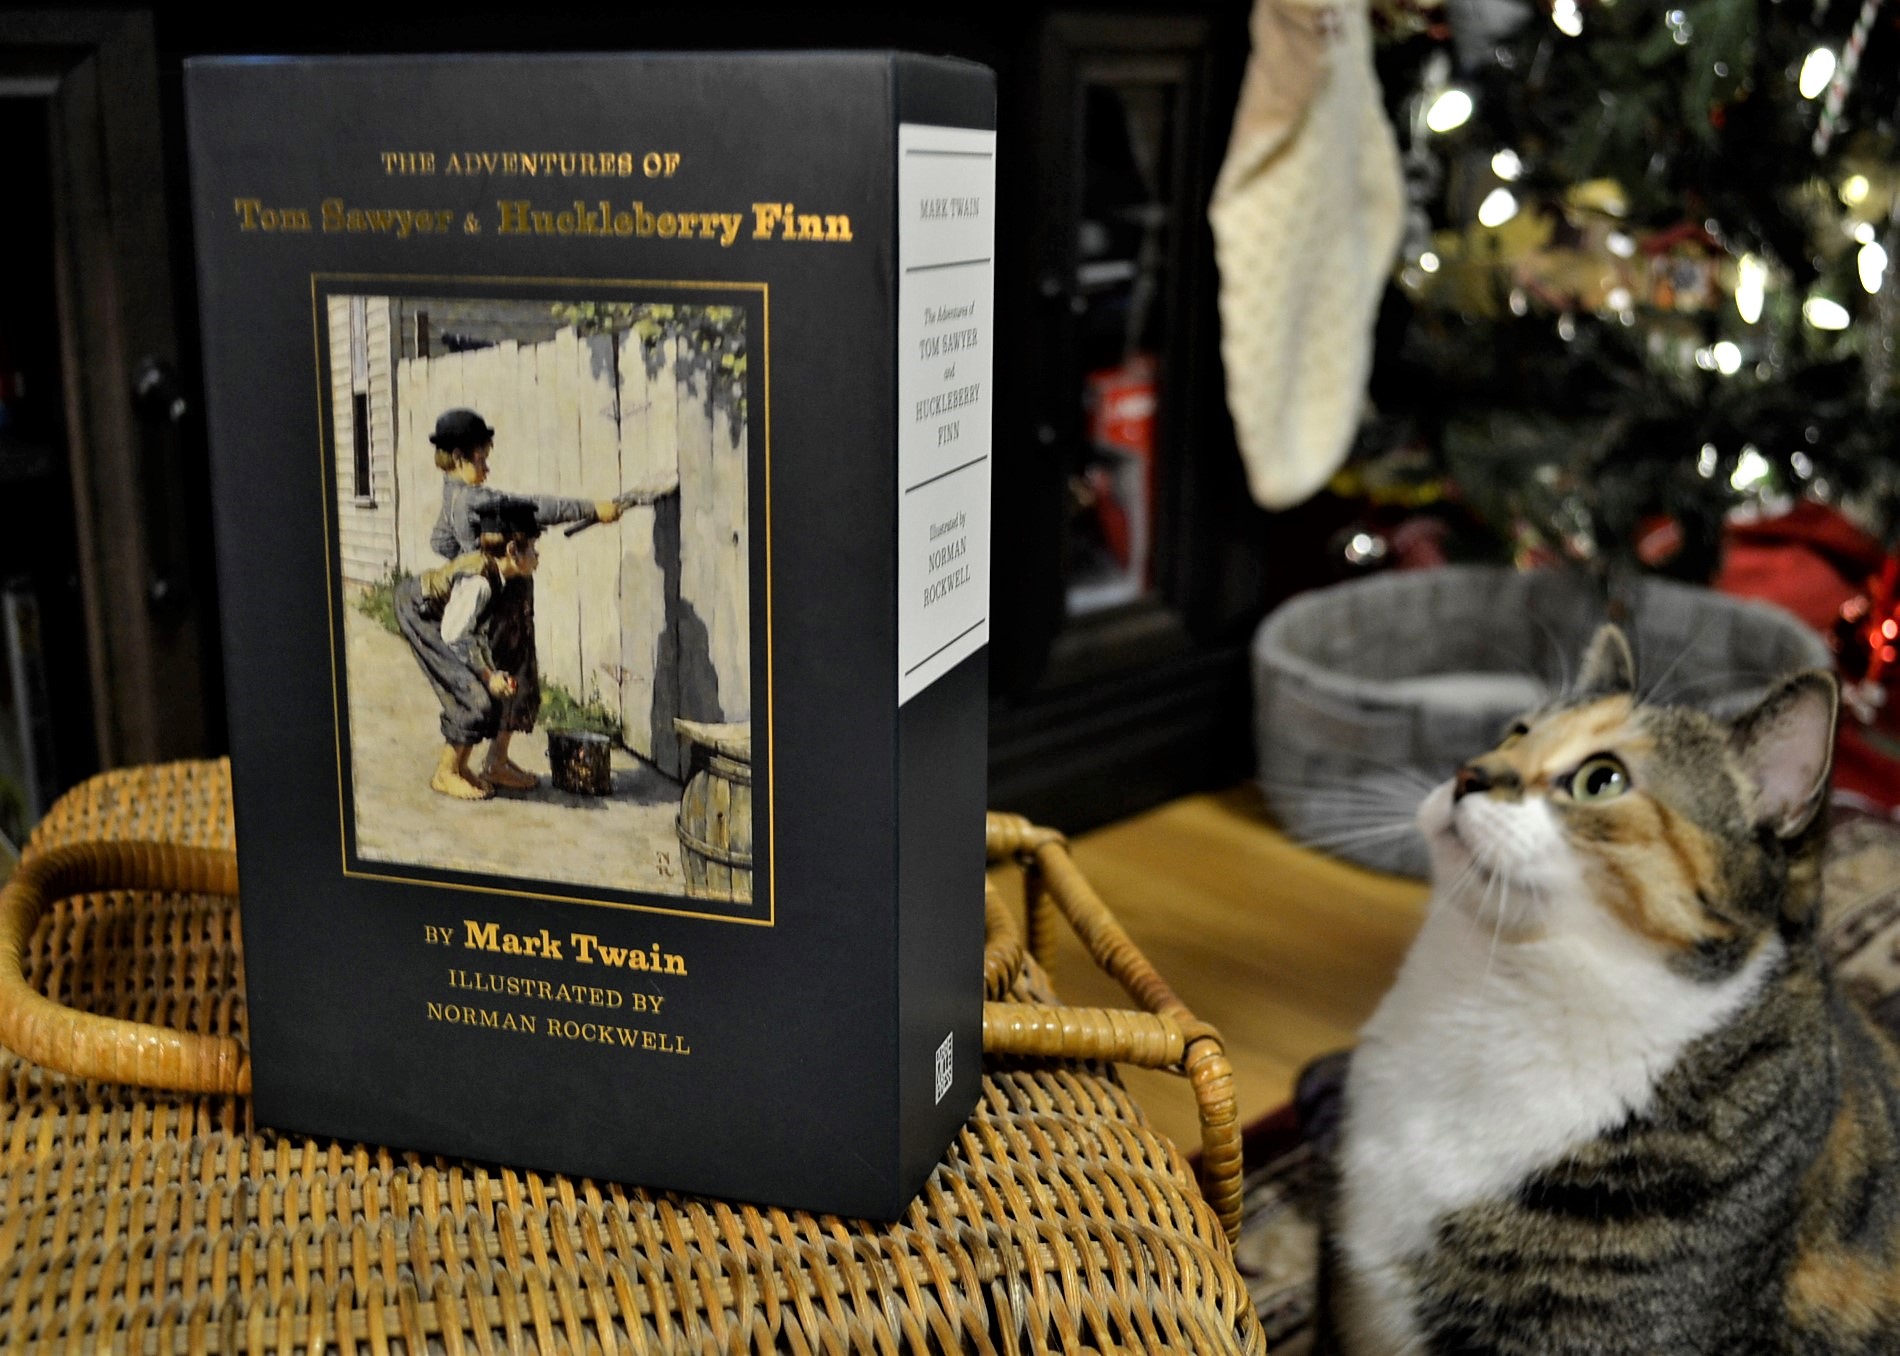 A calico tabby looks up at a slipcase illustrated by Norman Rockwell.